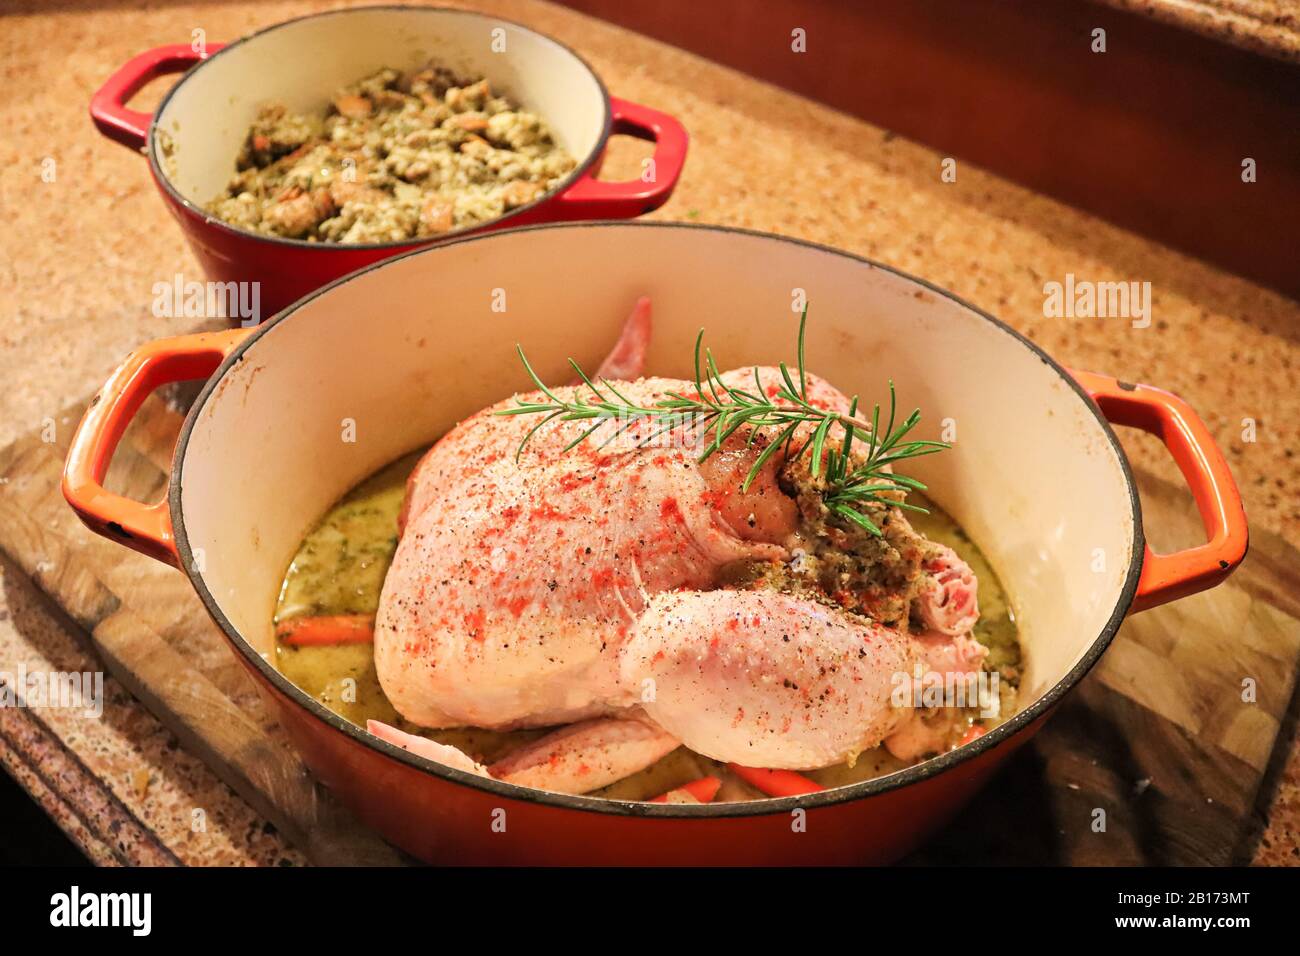 Top view of a raw chicken with stuffing in a pot Stock Photo